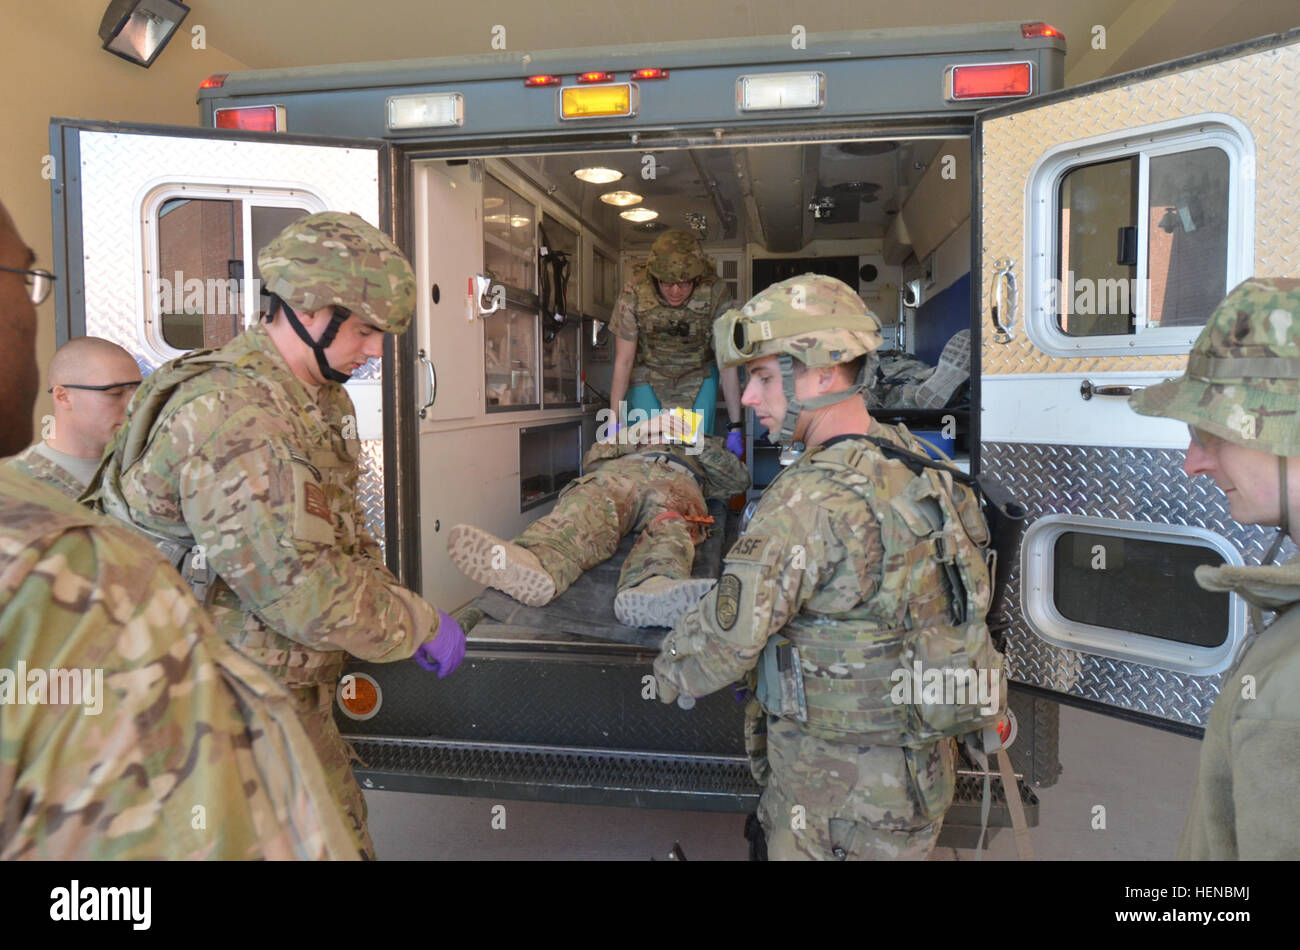 Soldiers assist Kandahar Airfield Role 3 Hospital providers with unloading 'injured' patients from an ambulance during a mass casualty exercise Feb. 14, 2014. The exercise involved responding to injured personnel from a civilian helicopter crash and the triage and movement of the injured to higher levels of care. (U.S. Army photo by Capt. Andrew Cochran/released) More coming in 140214-A-VT601-402 Stock Photo